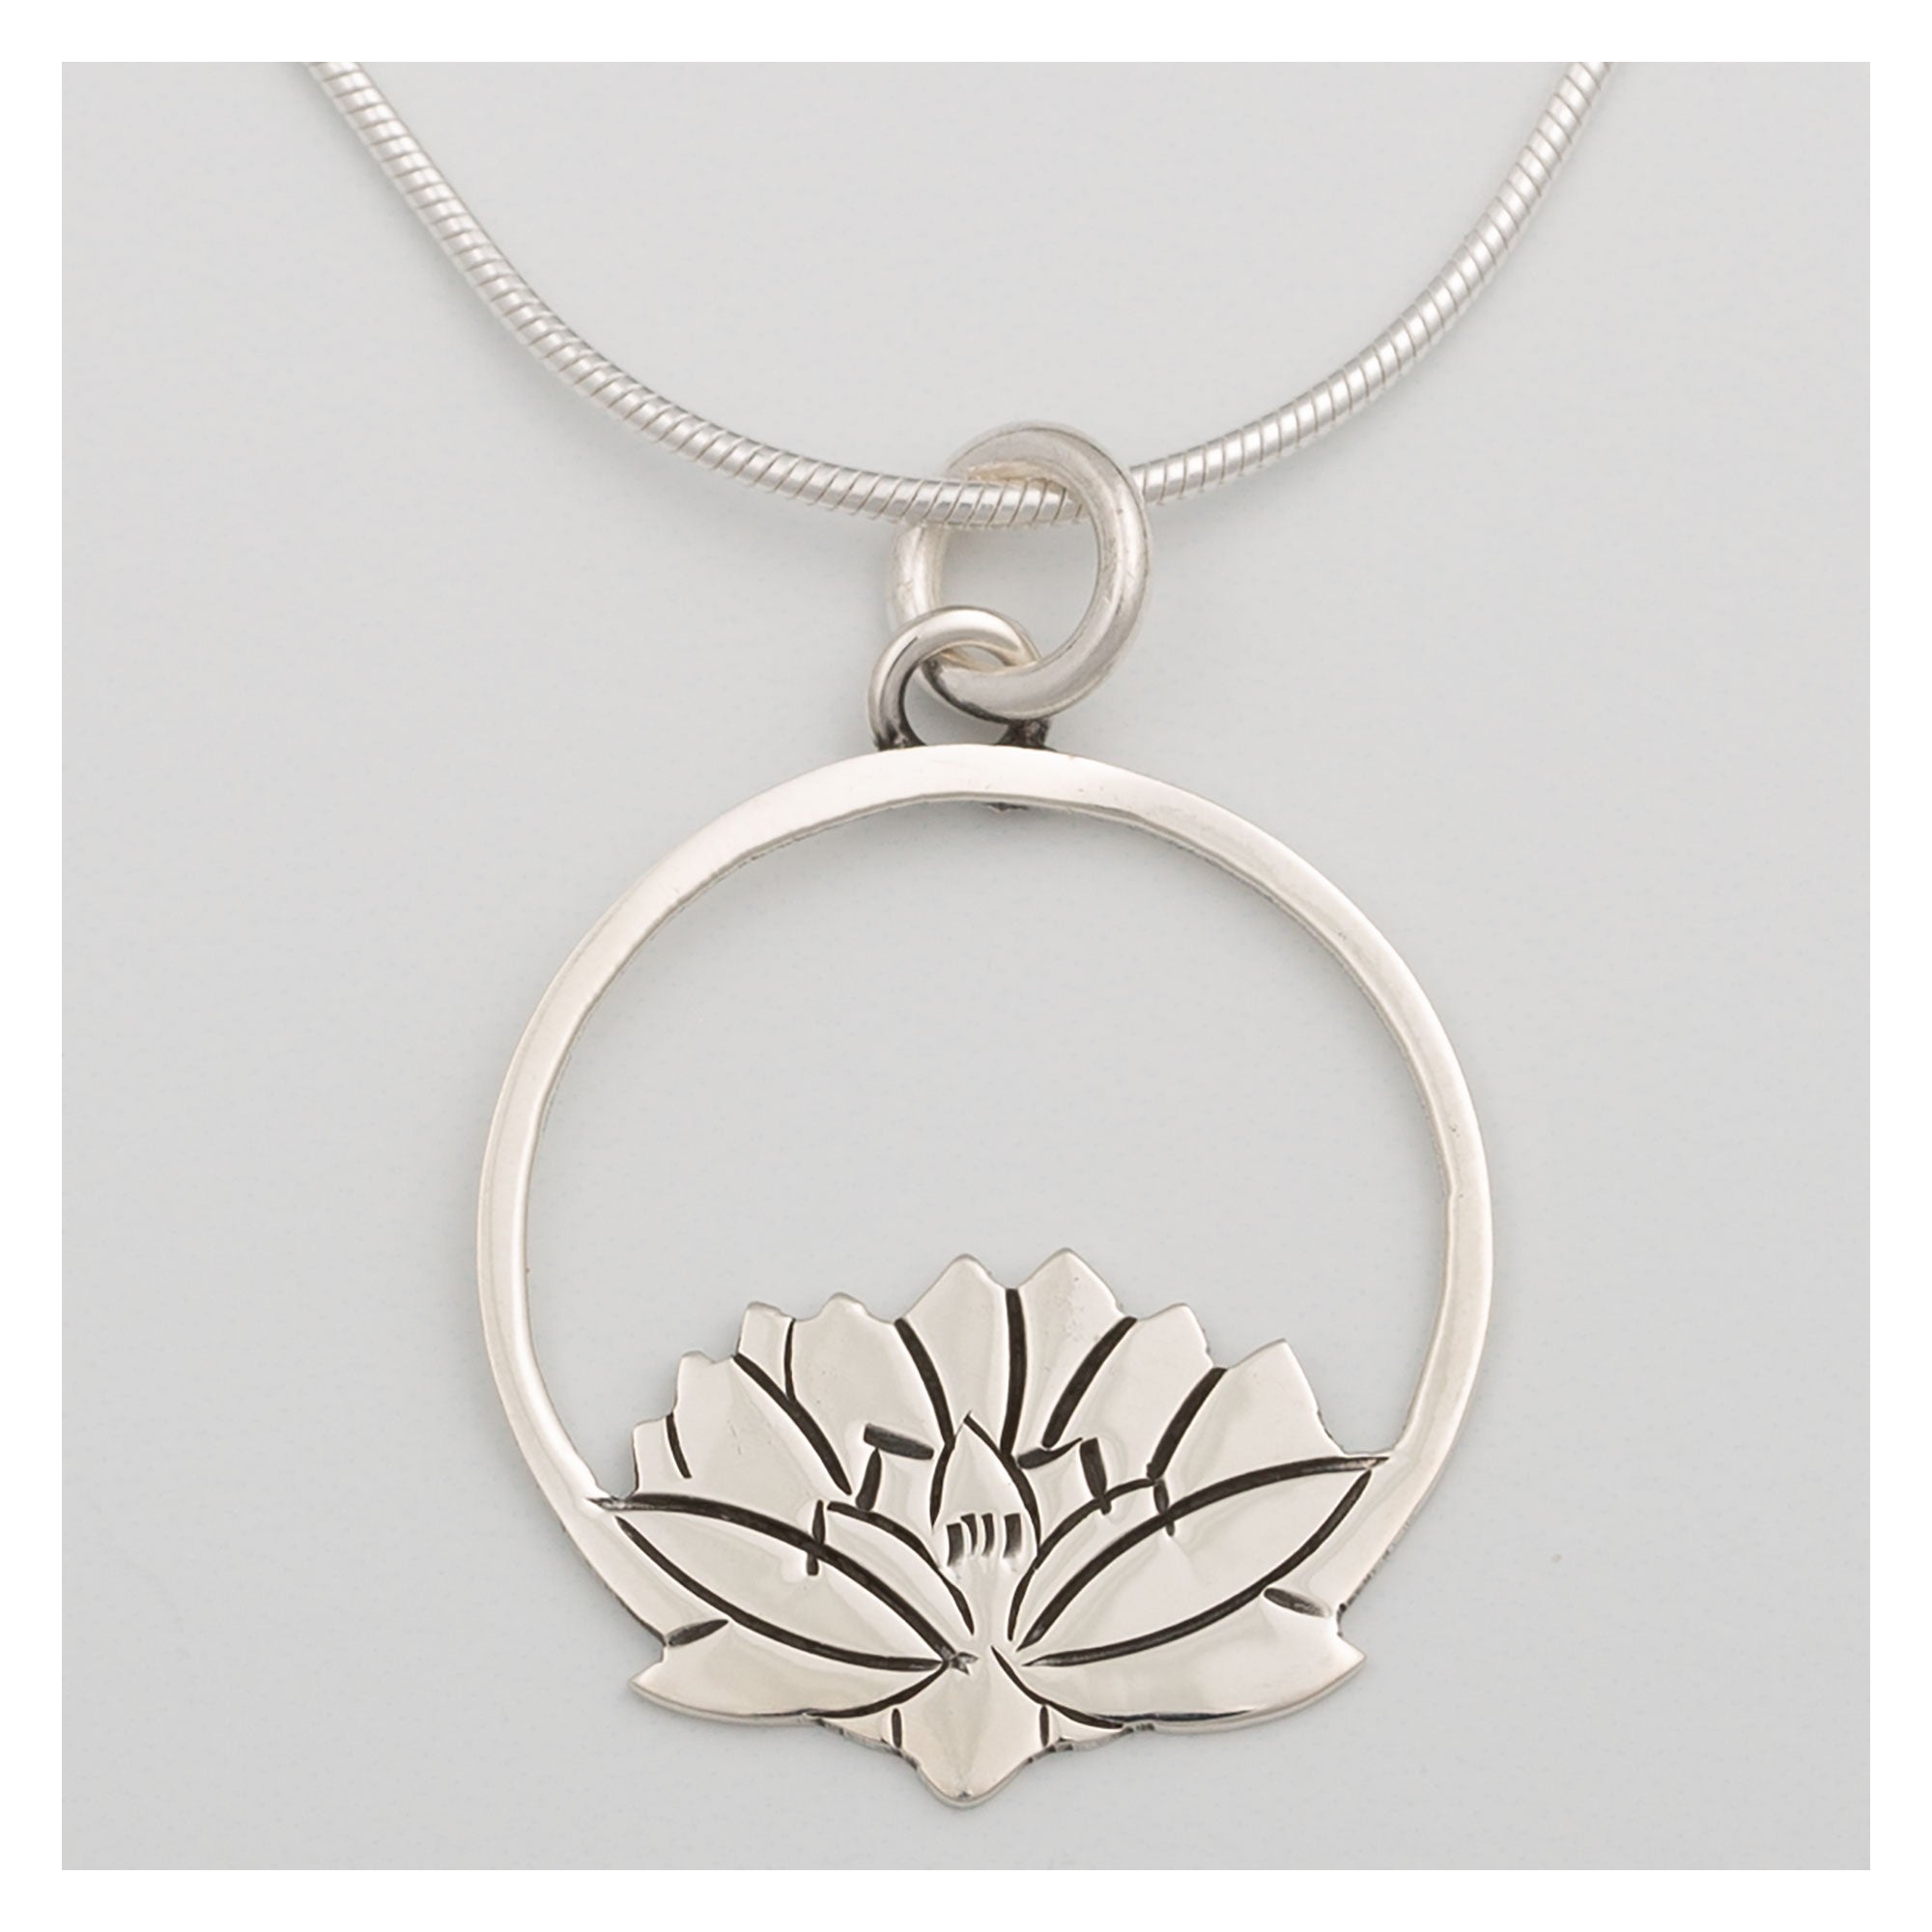 Blooming Flowers Sterling Necklace - Water Lily - With Diamond Cut Chain